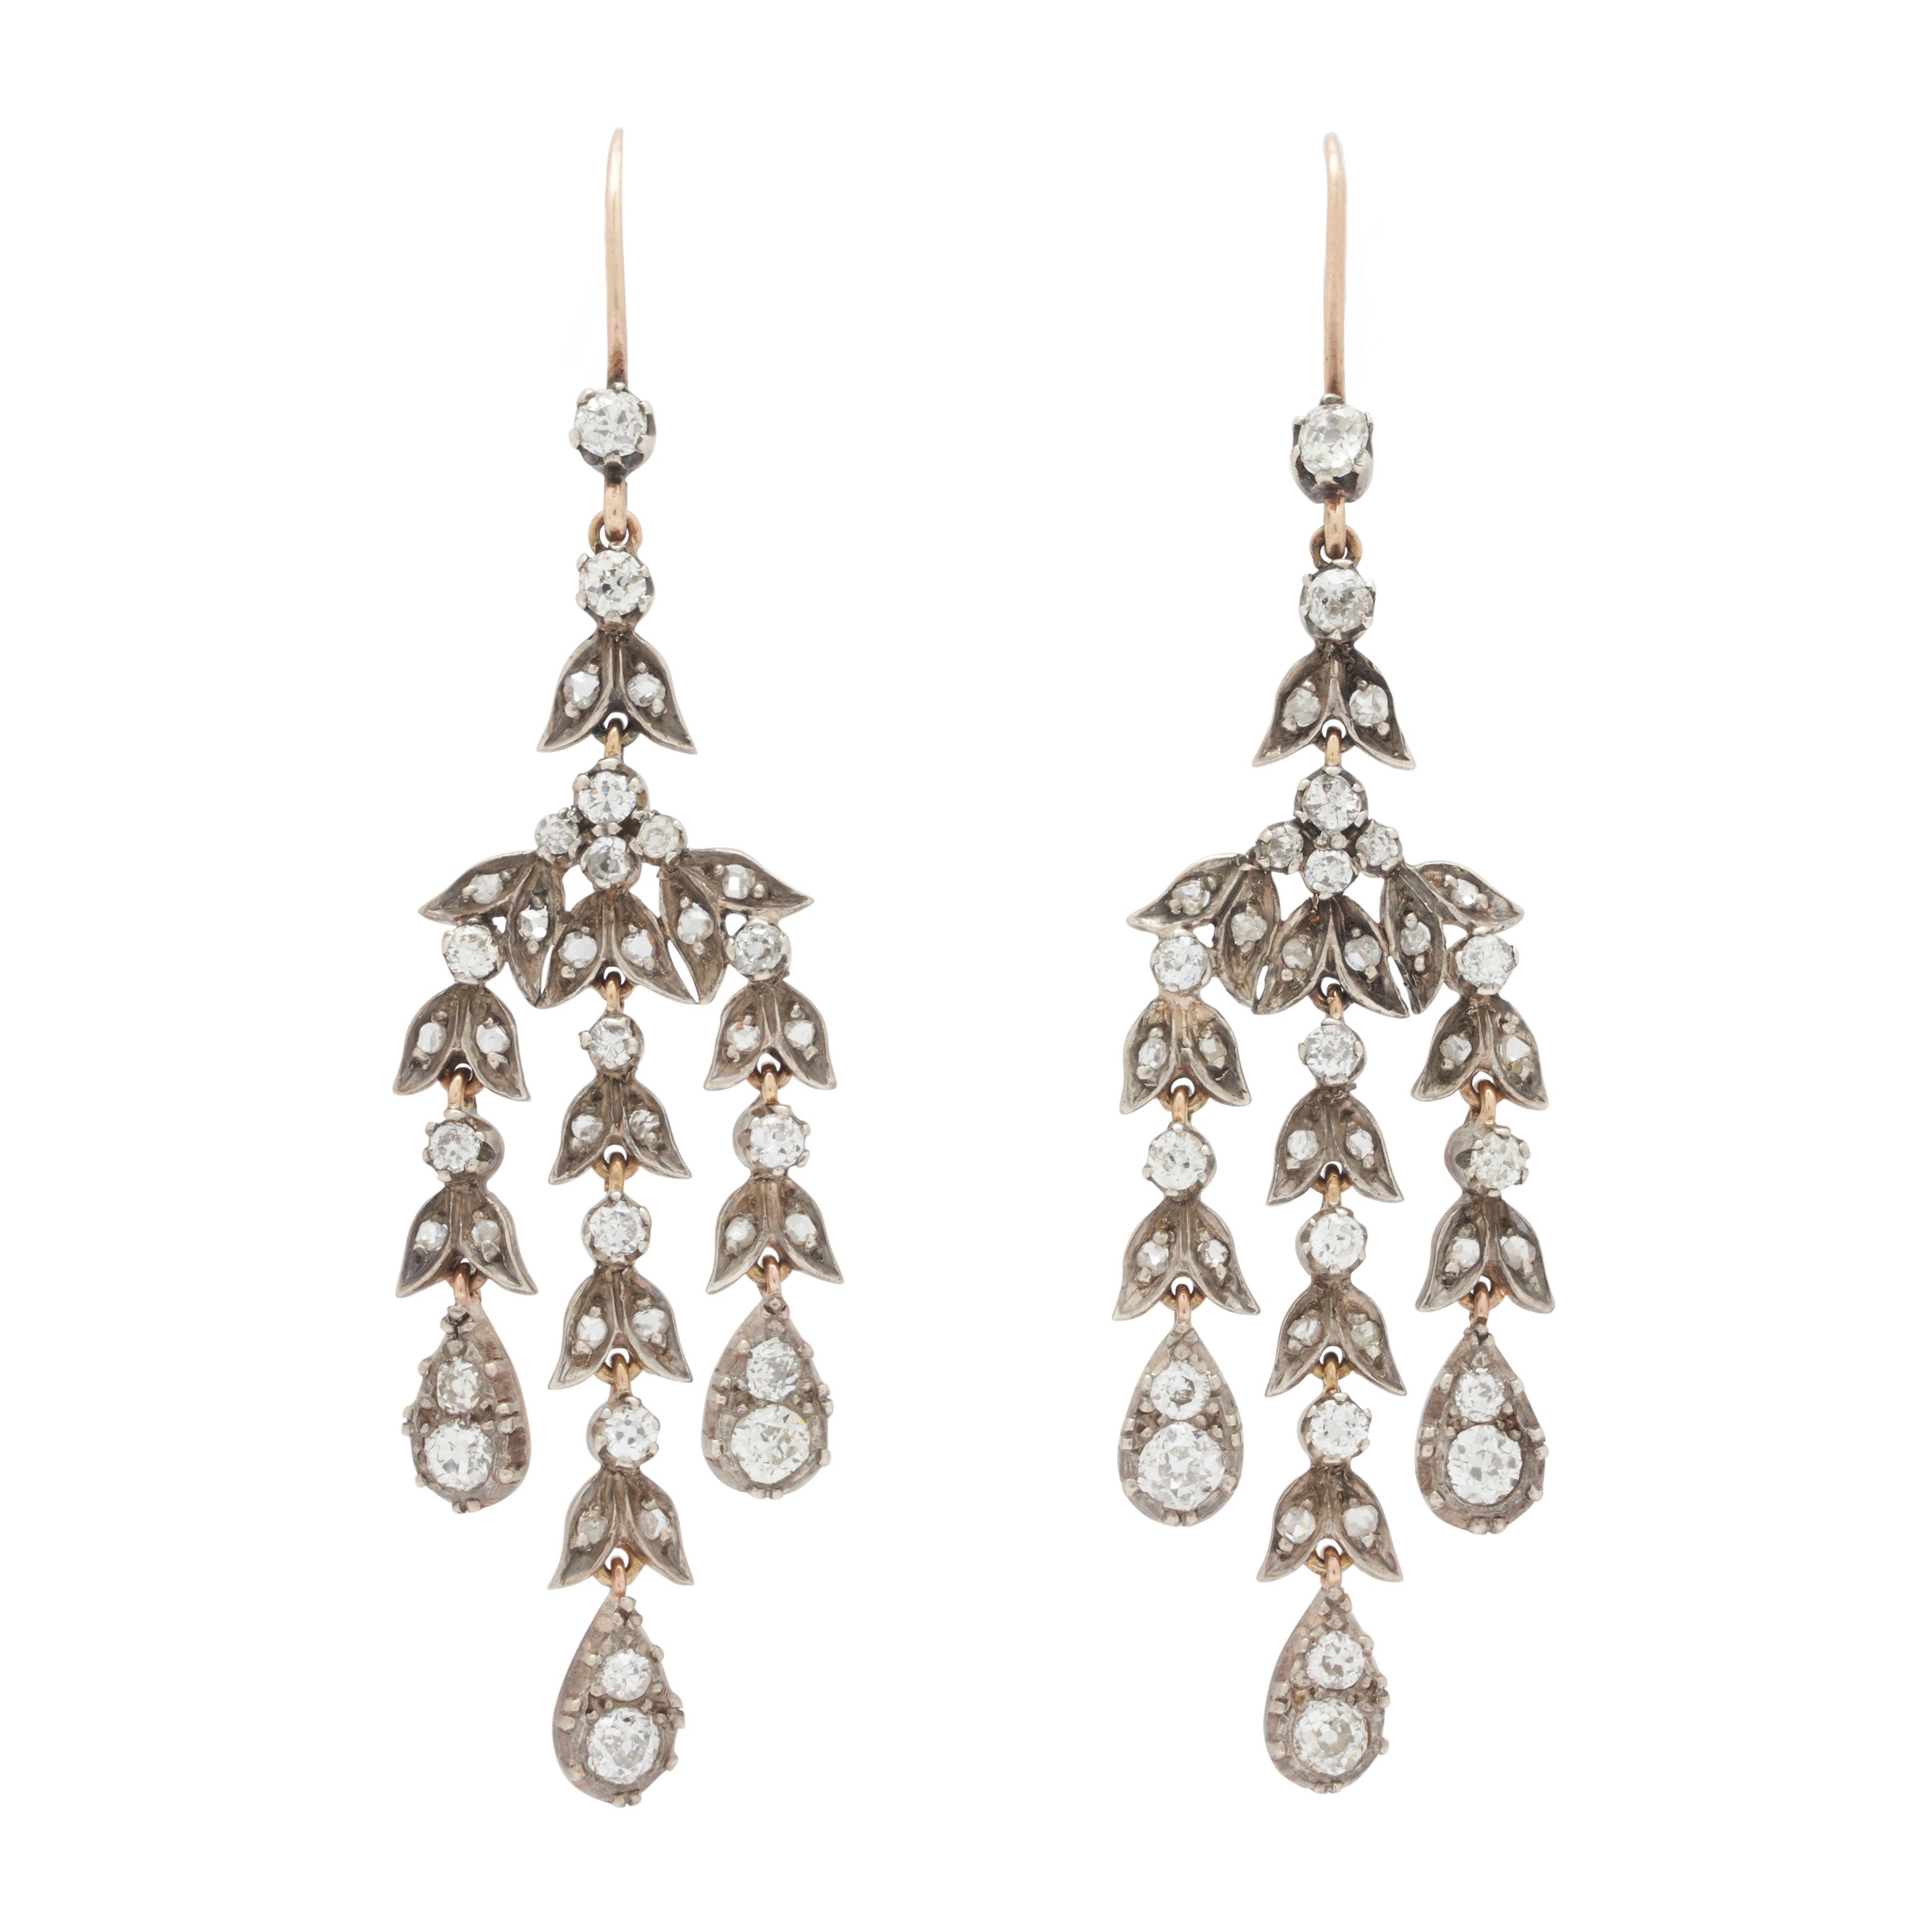 Victorian Rose And Old Mine Cut Diamond Chandelier Earrings